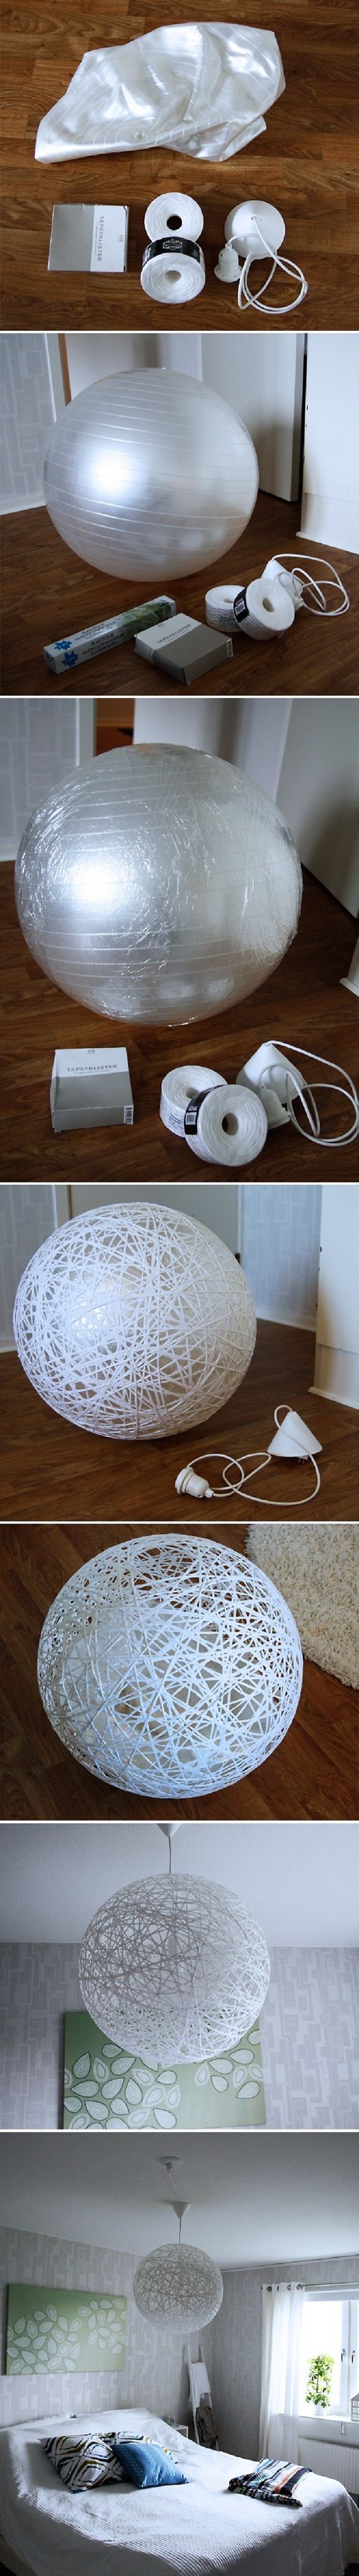 04-instant-and-fun-easy-diy-craft-projects